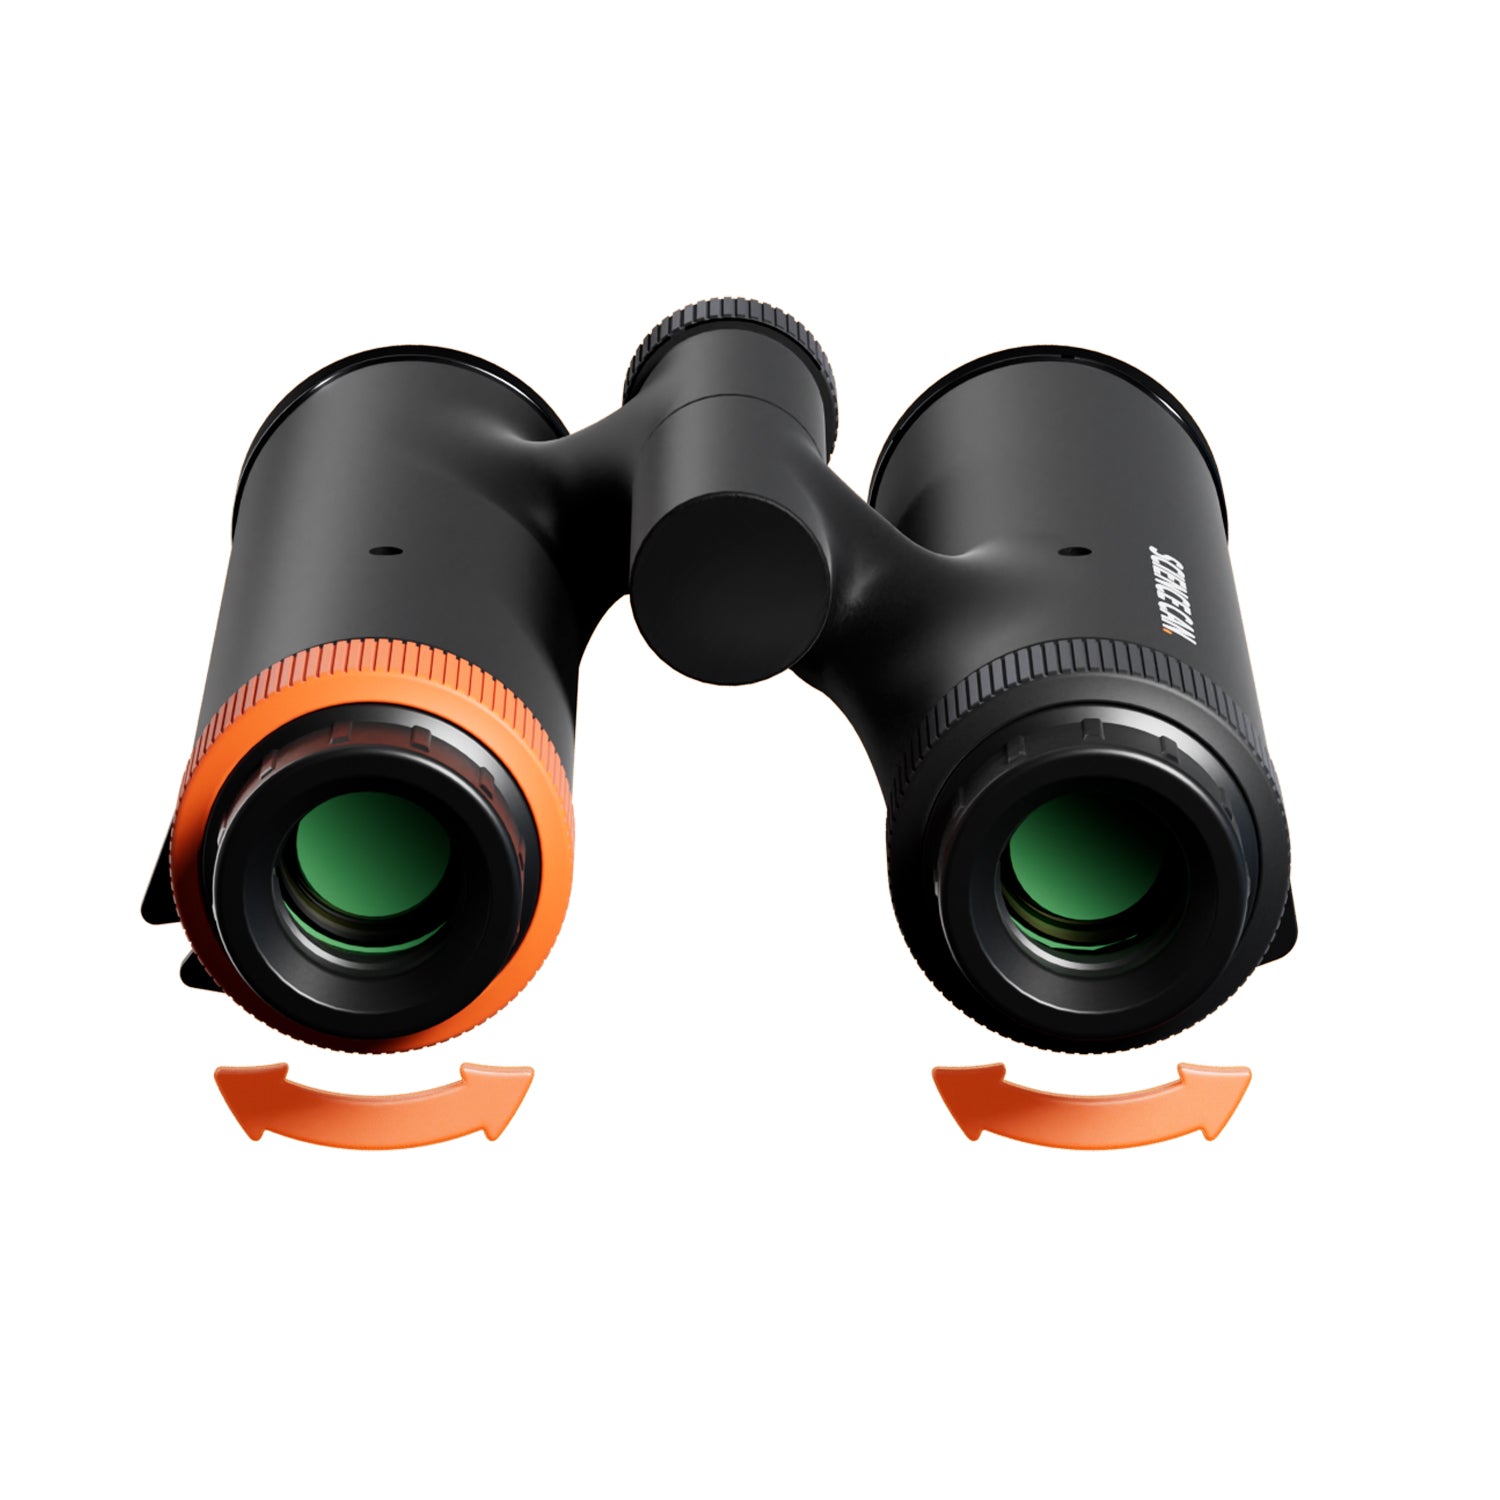 To get a sharp image, kids simply turn the focusing wheels. Thanks to the foldable central axis, they adapt the binoculars to their individual needs.